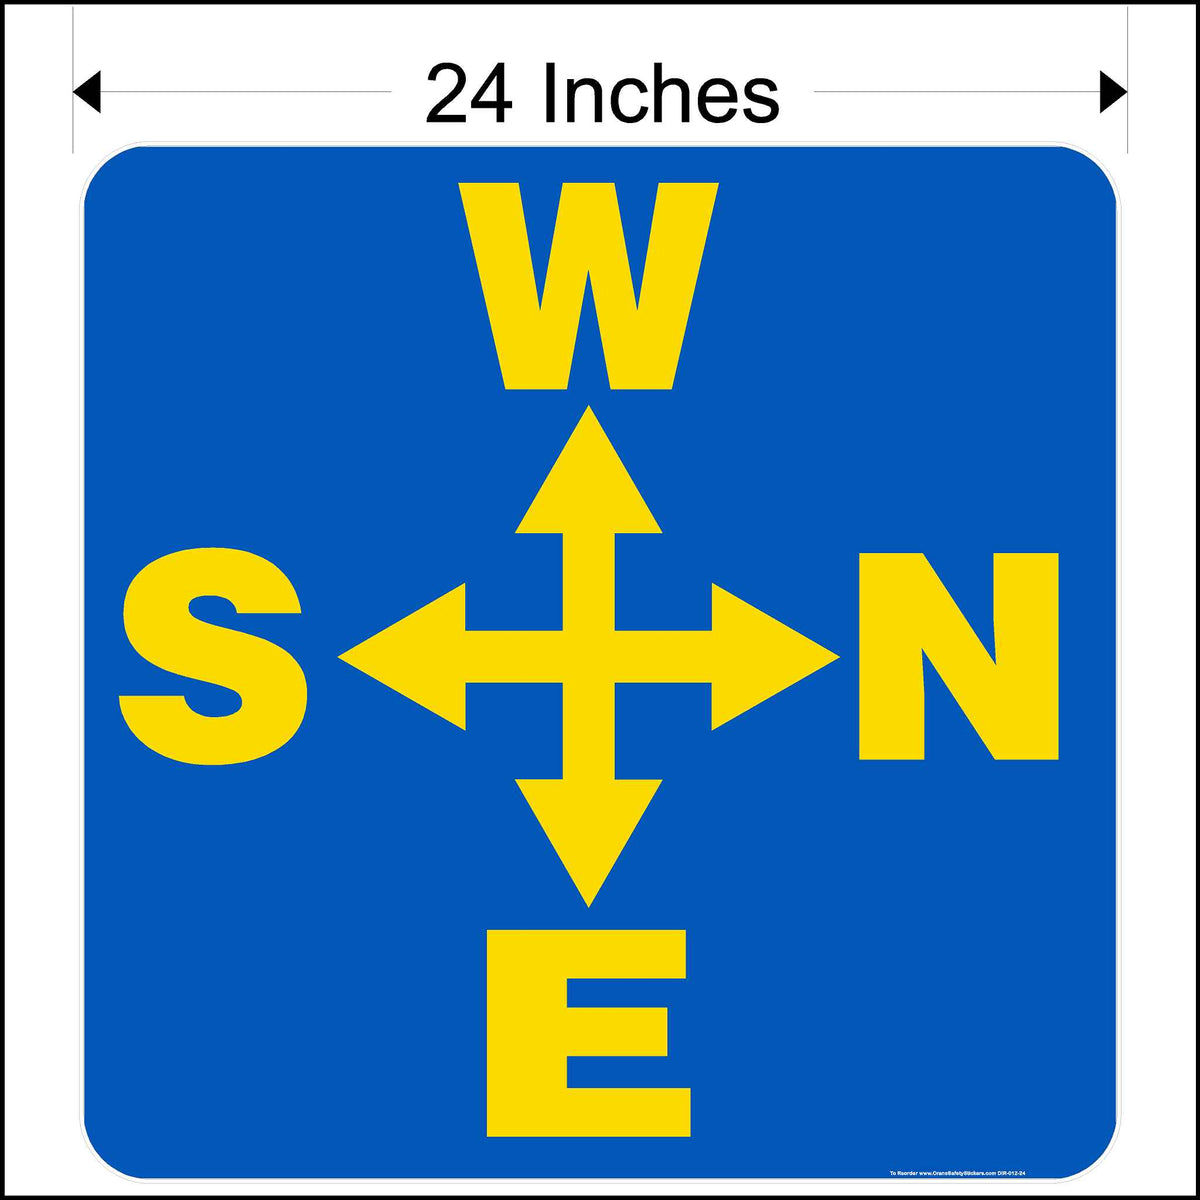 24 Inch overhead crane directional decal for the side of the crane. West, North, East, and South Arrows printed in yellow on blue background.